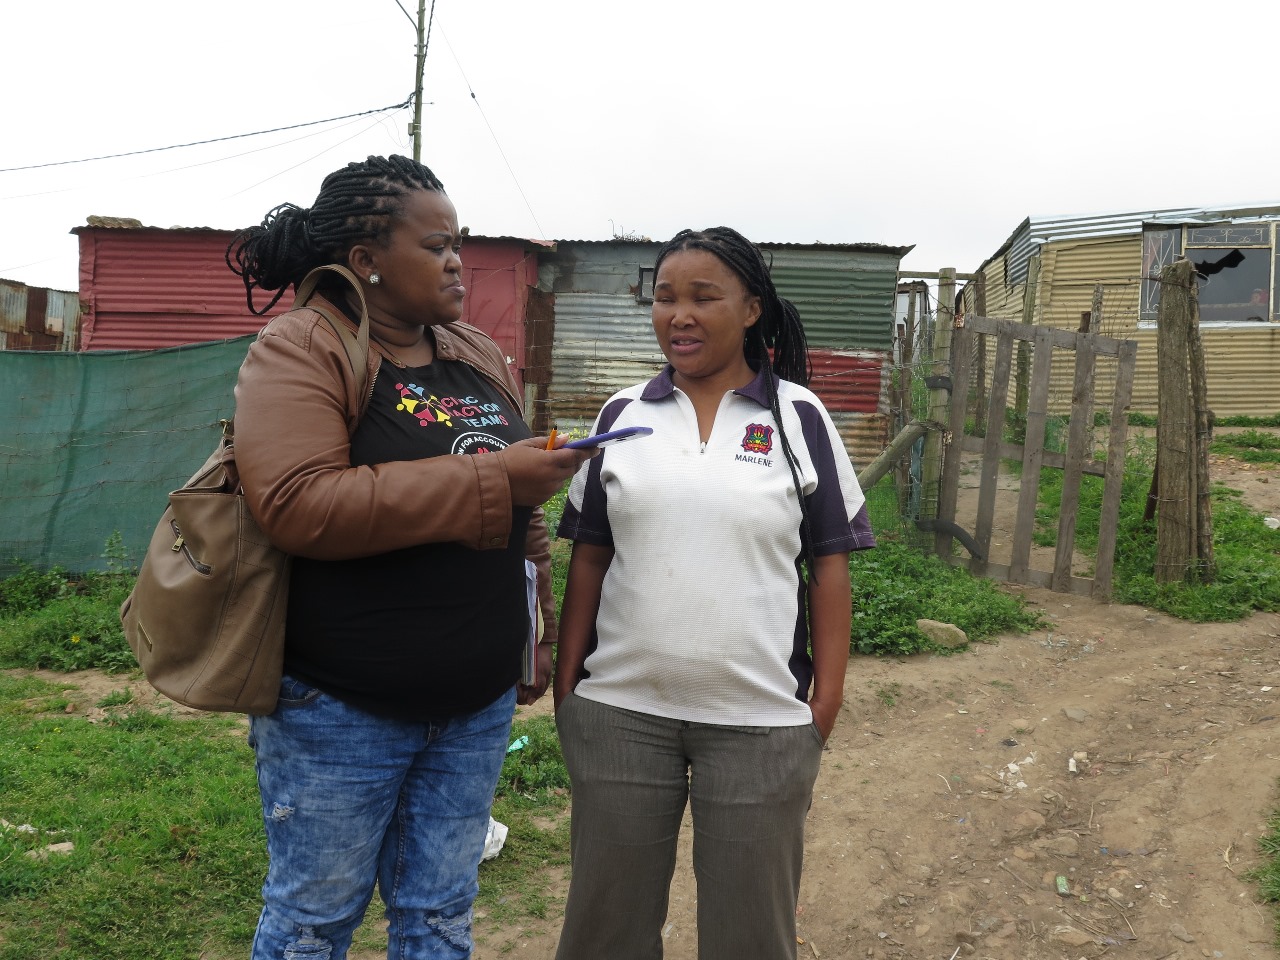 Lelethu Zono (left) interviewing Nicola Arends (right), Ward Committee member in Ghost Town and Sun City, Ward 3. Photo: Ntombentsha Yamiso